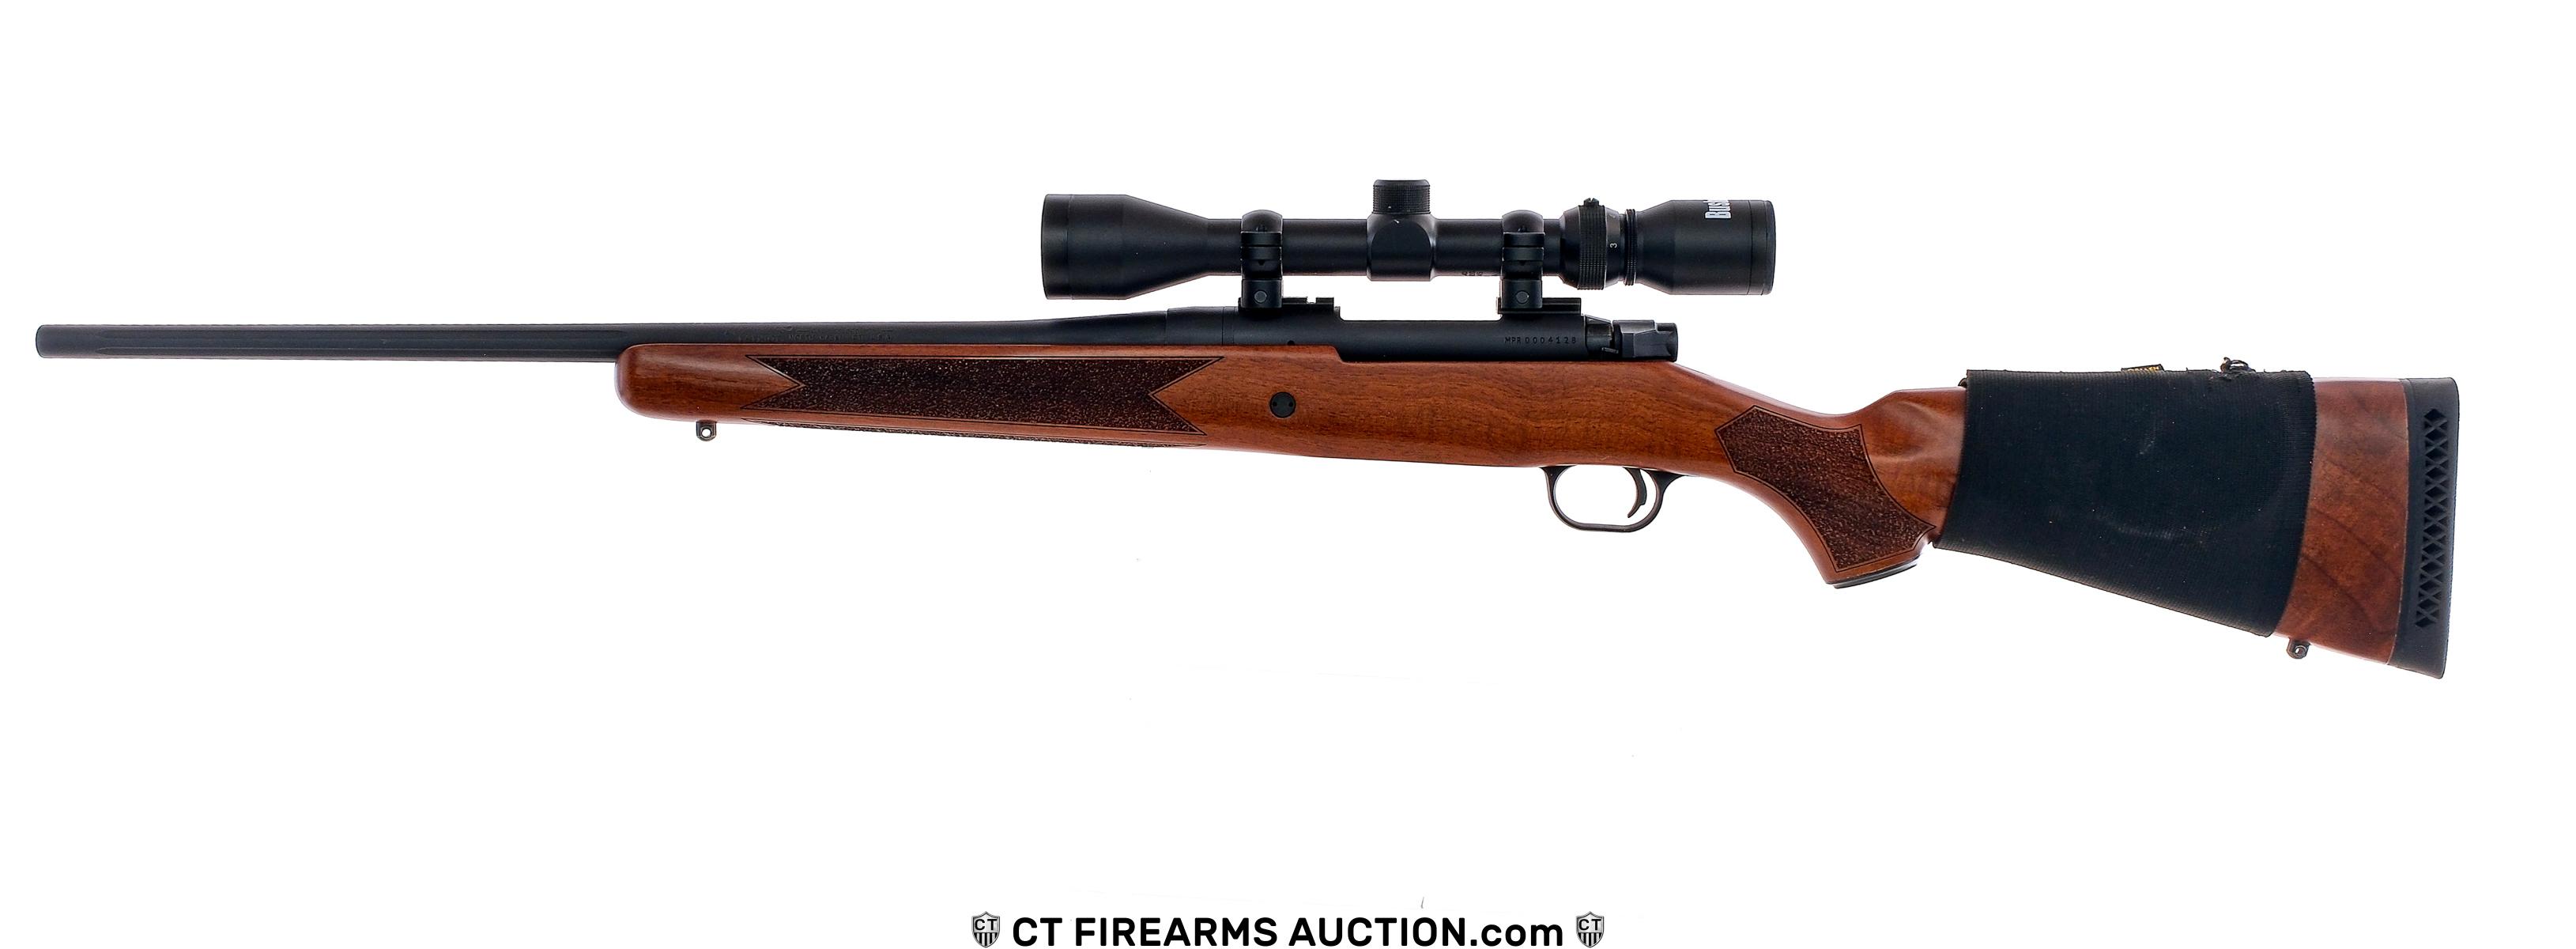 Mossberg Patriot .308 Win Bolt Action Rifle